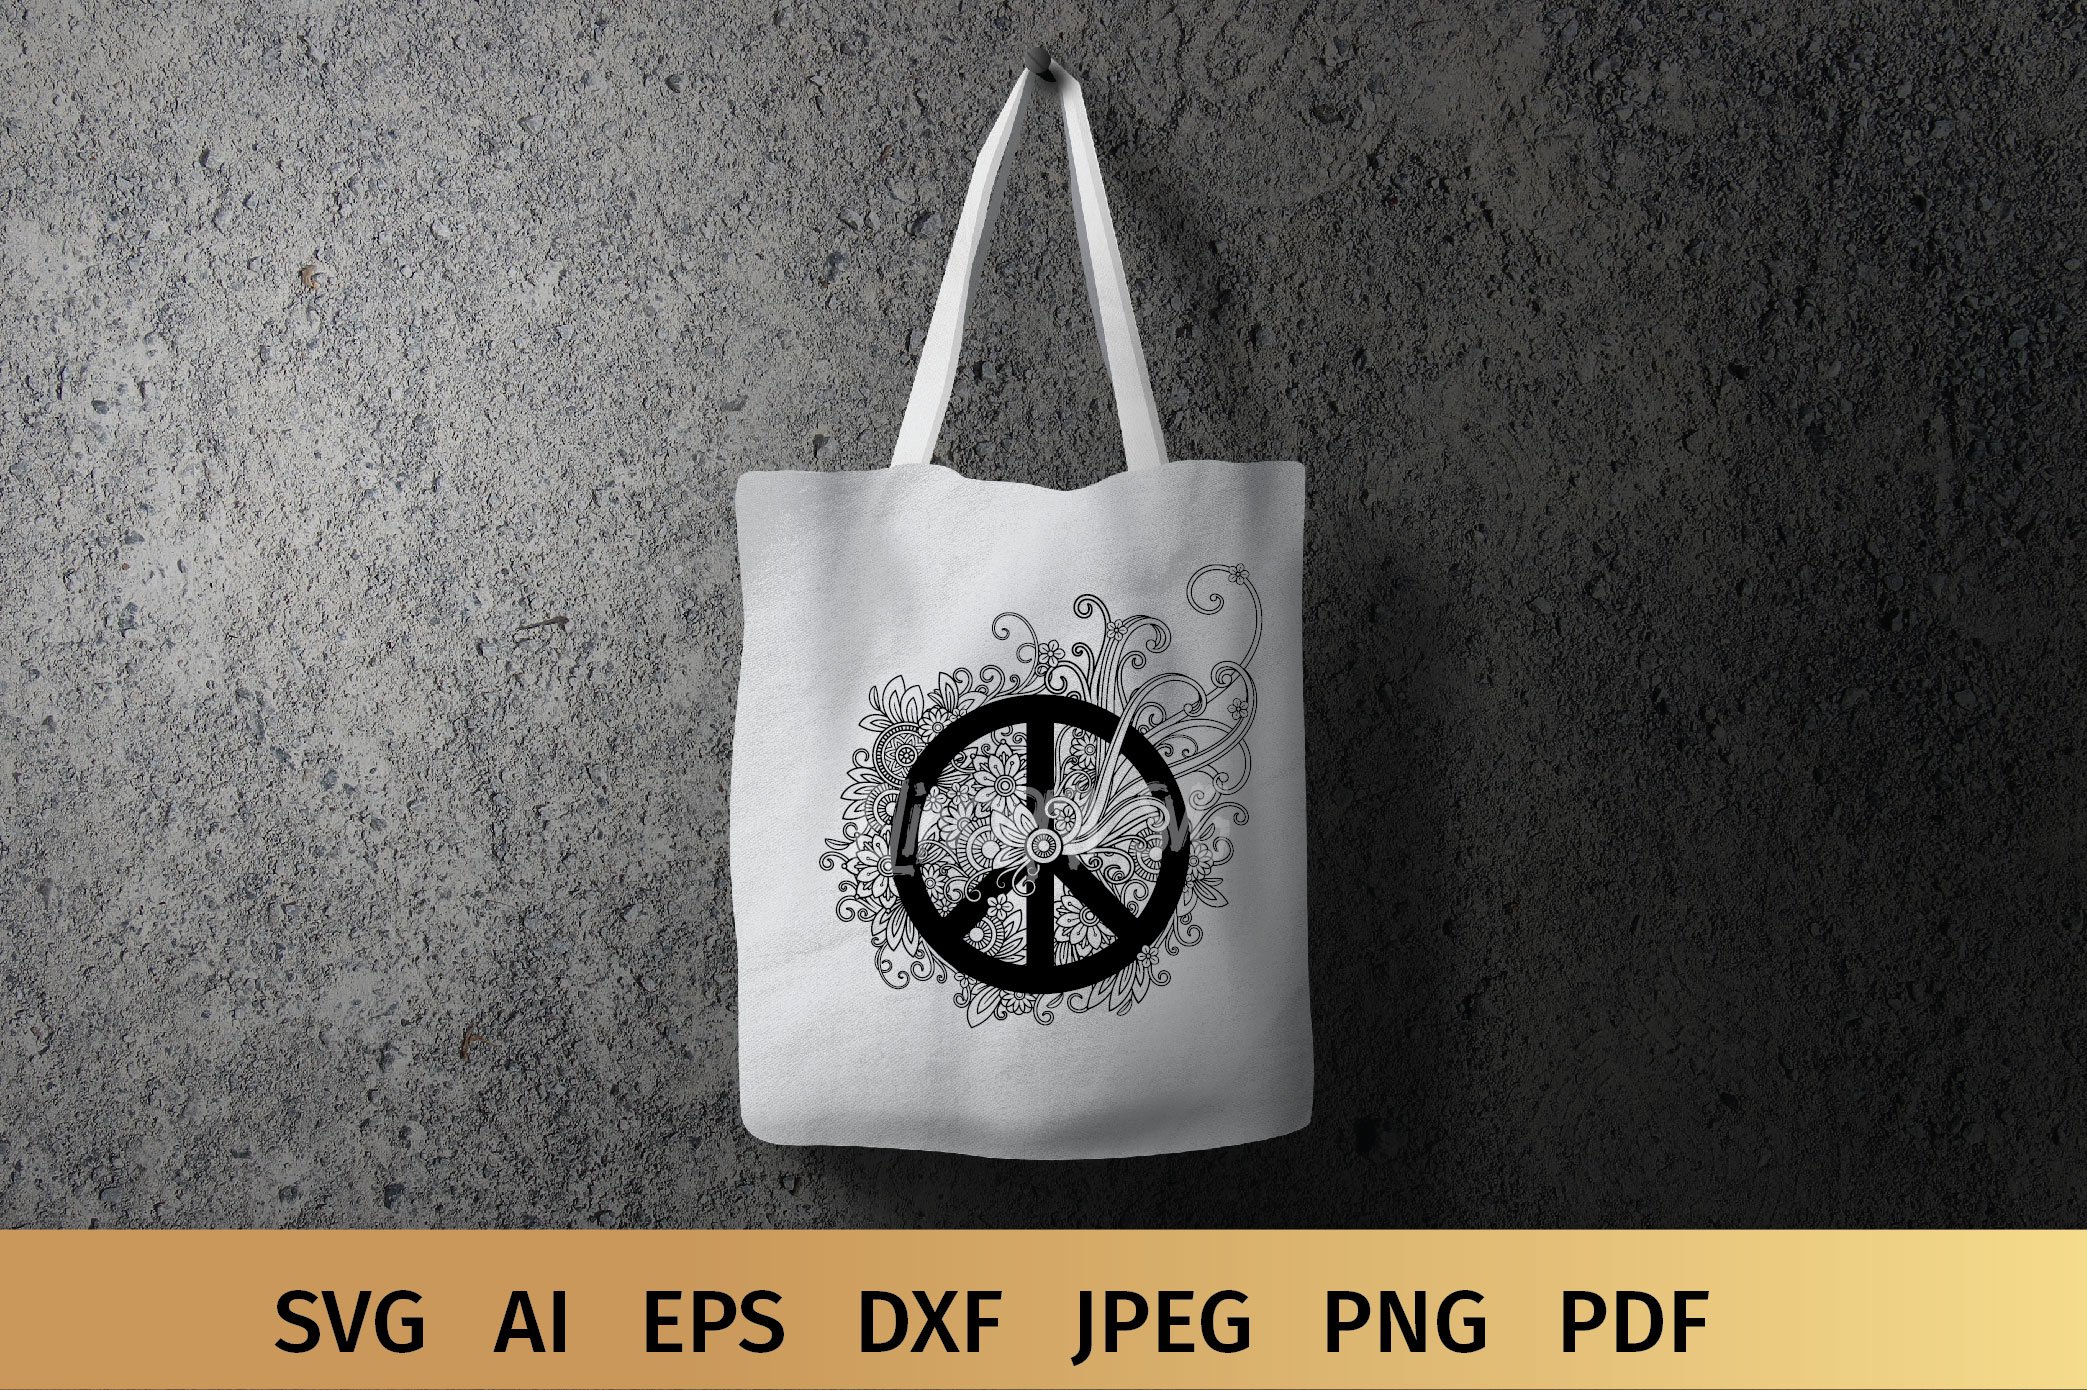 White eco bag with black peace sign.